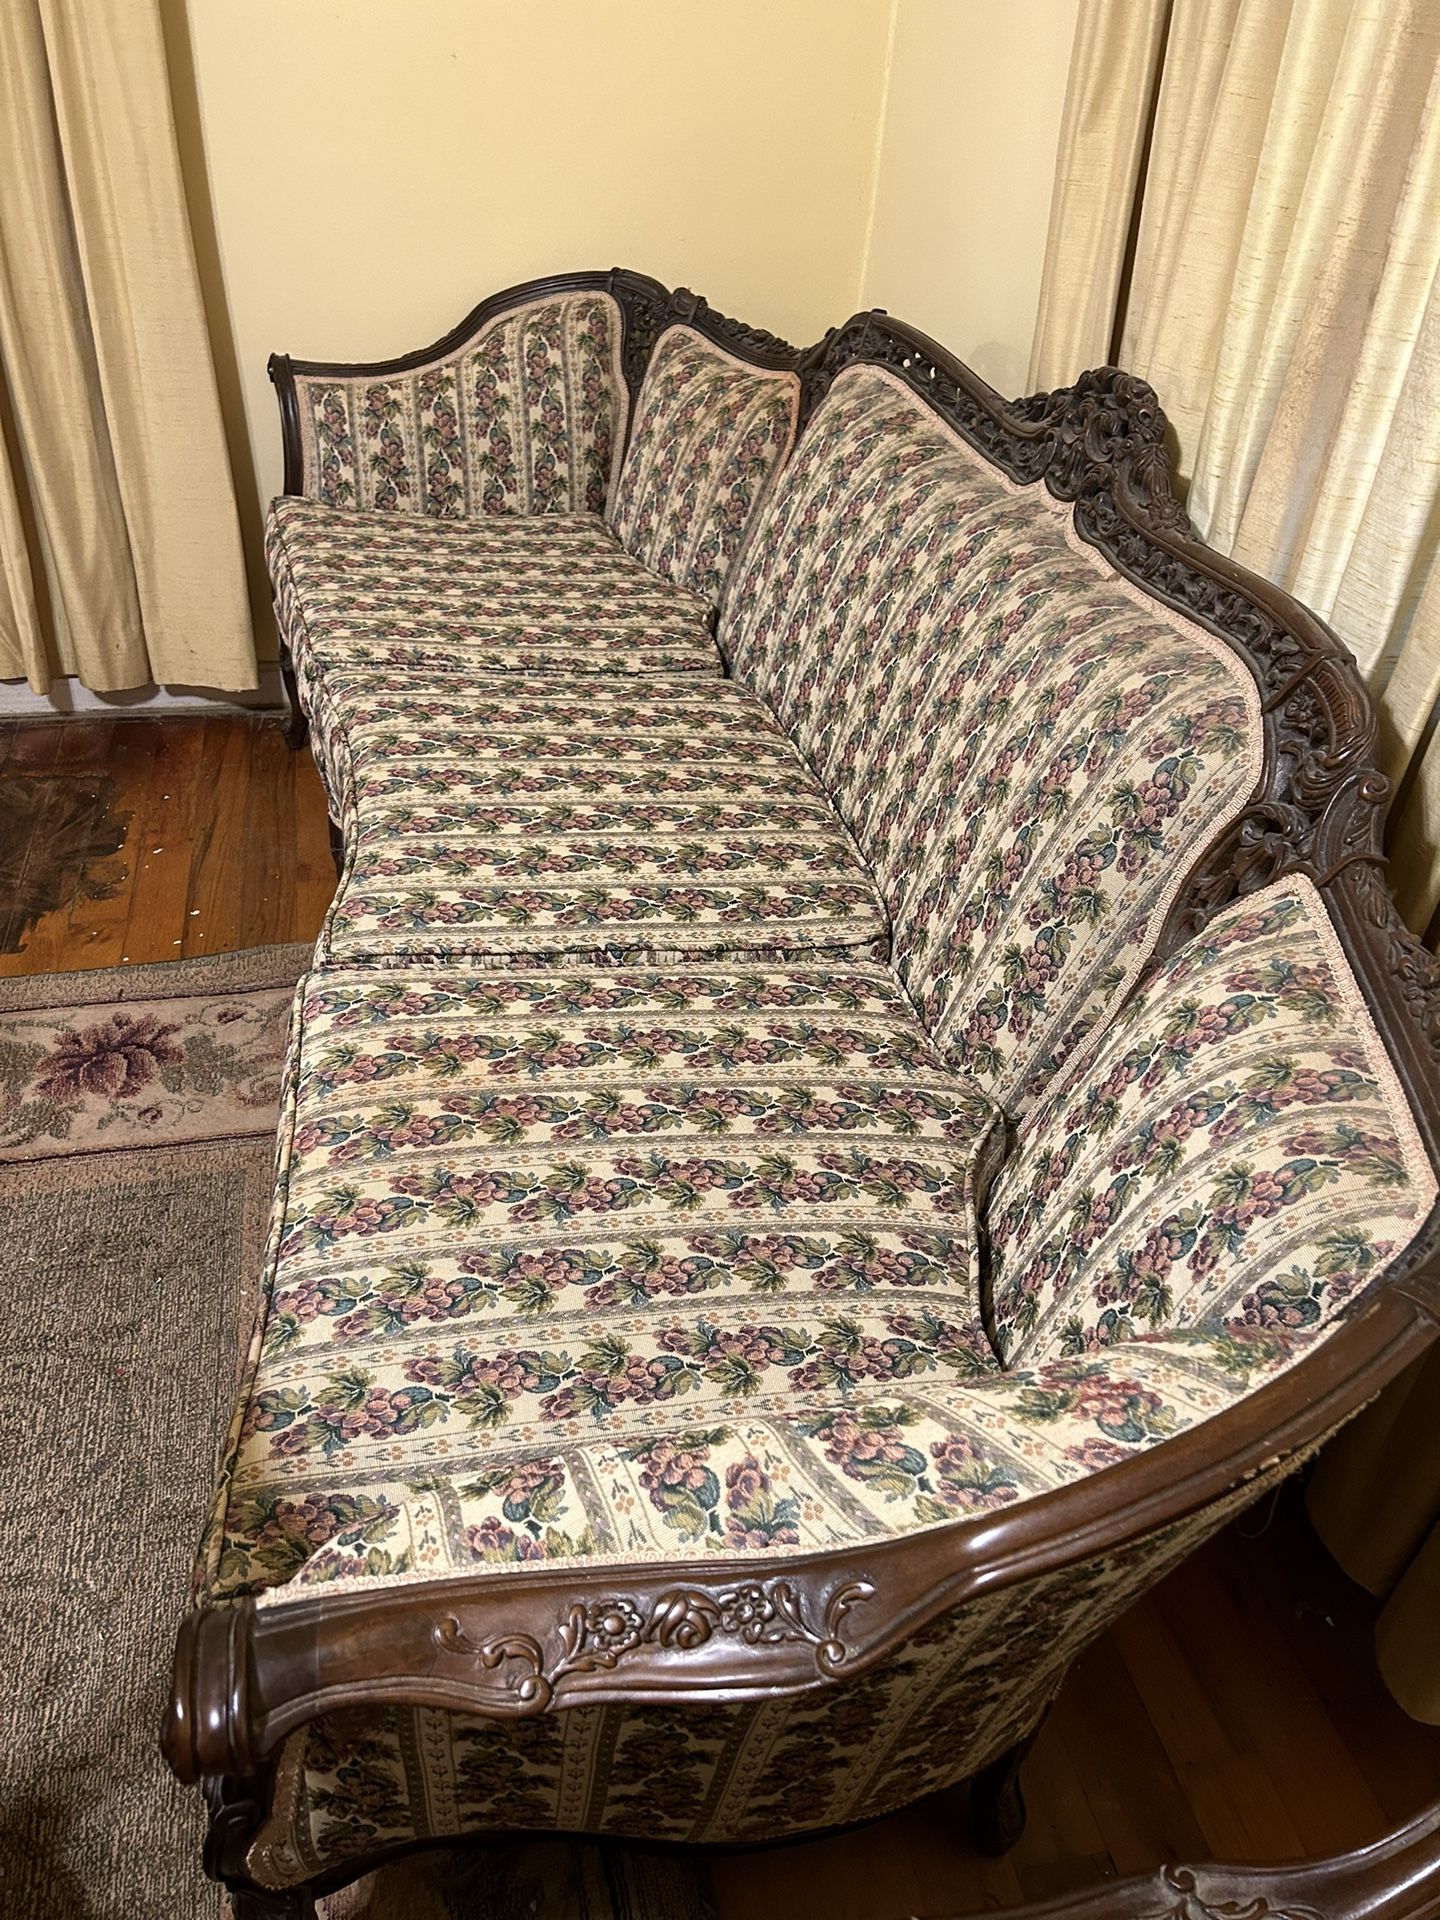 VINTAGE LIVING ROOM SET Couch, Chair, Ottomans